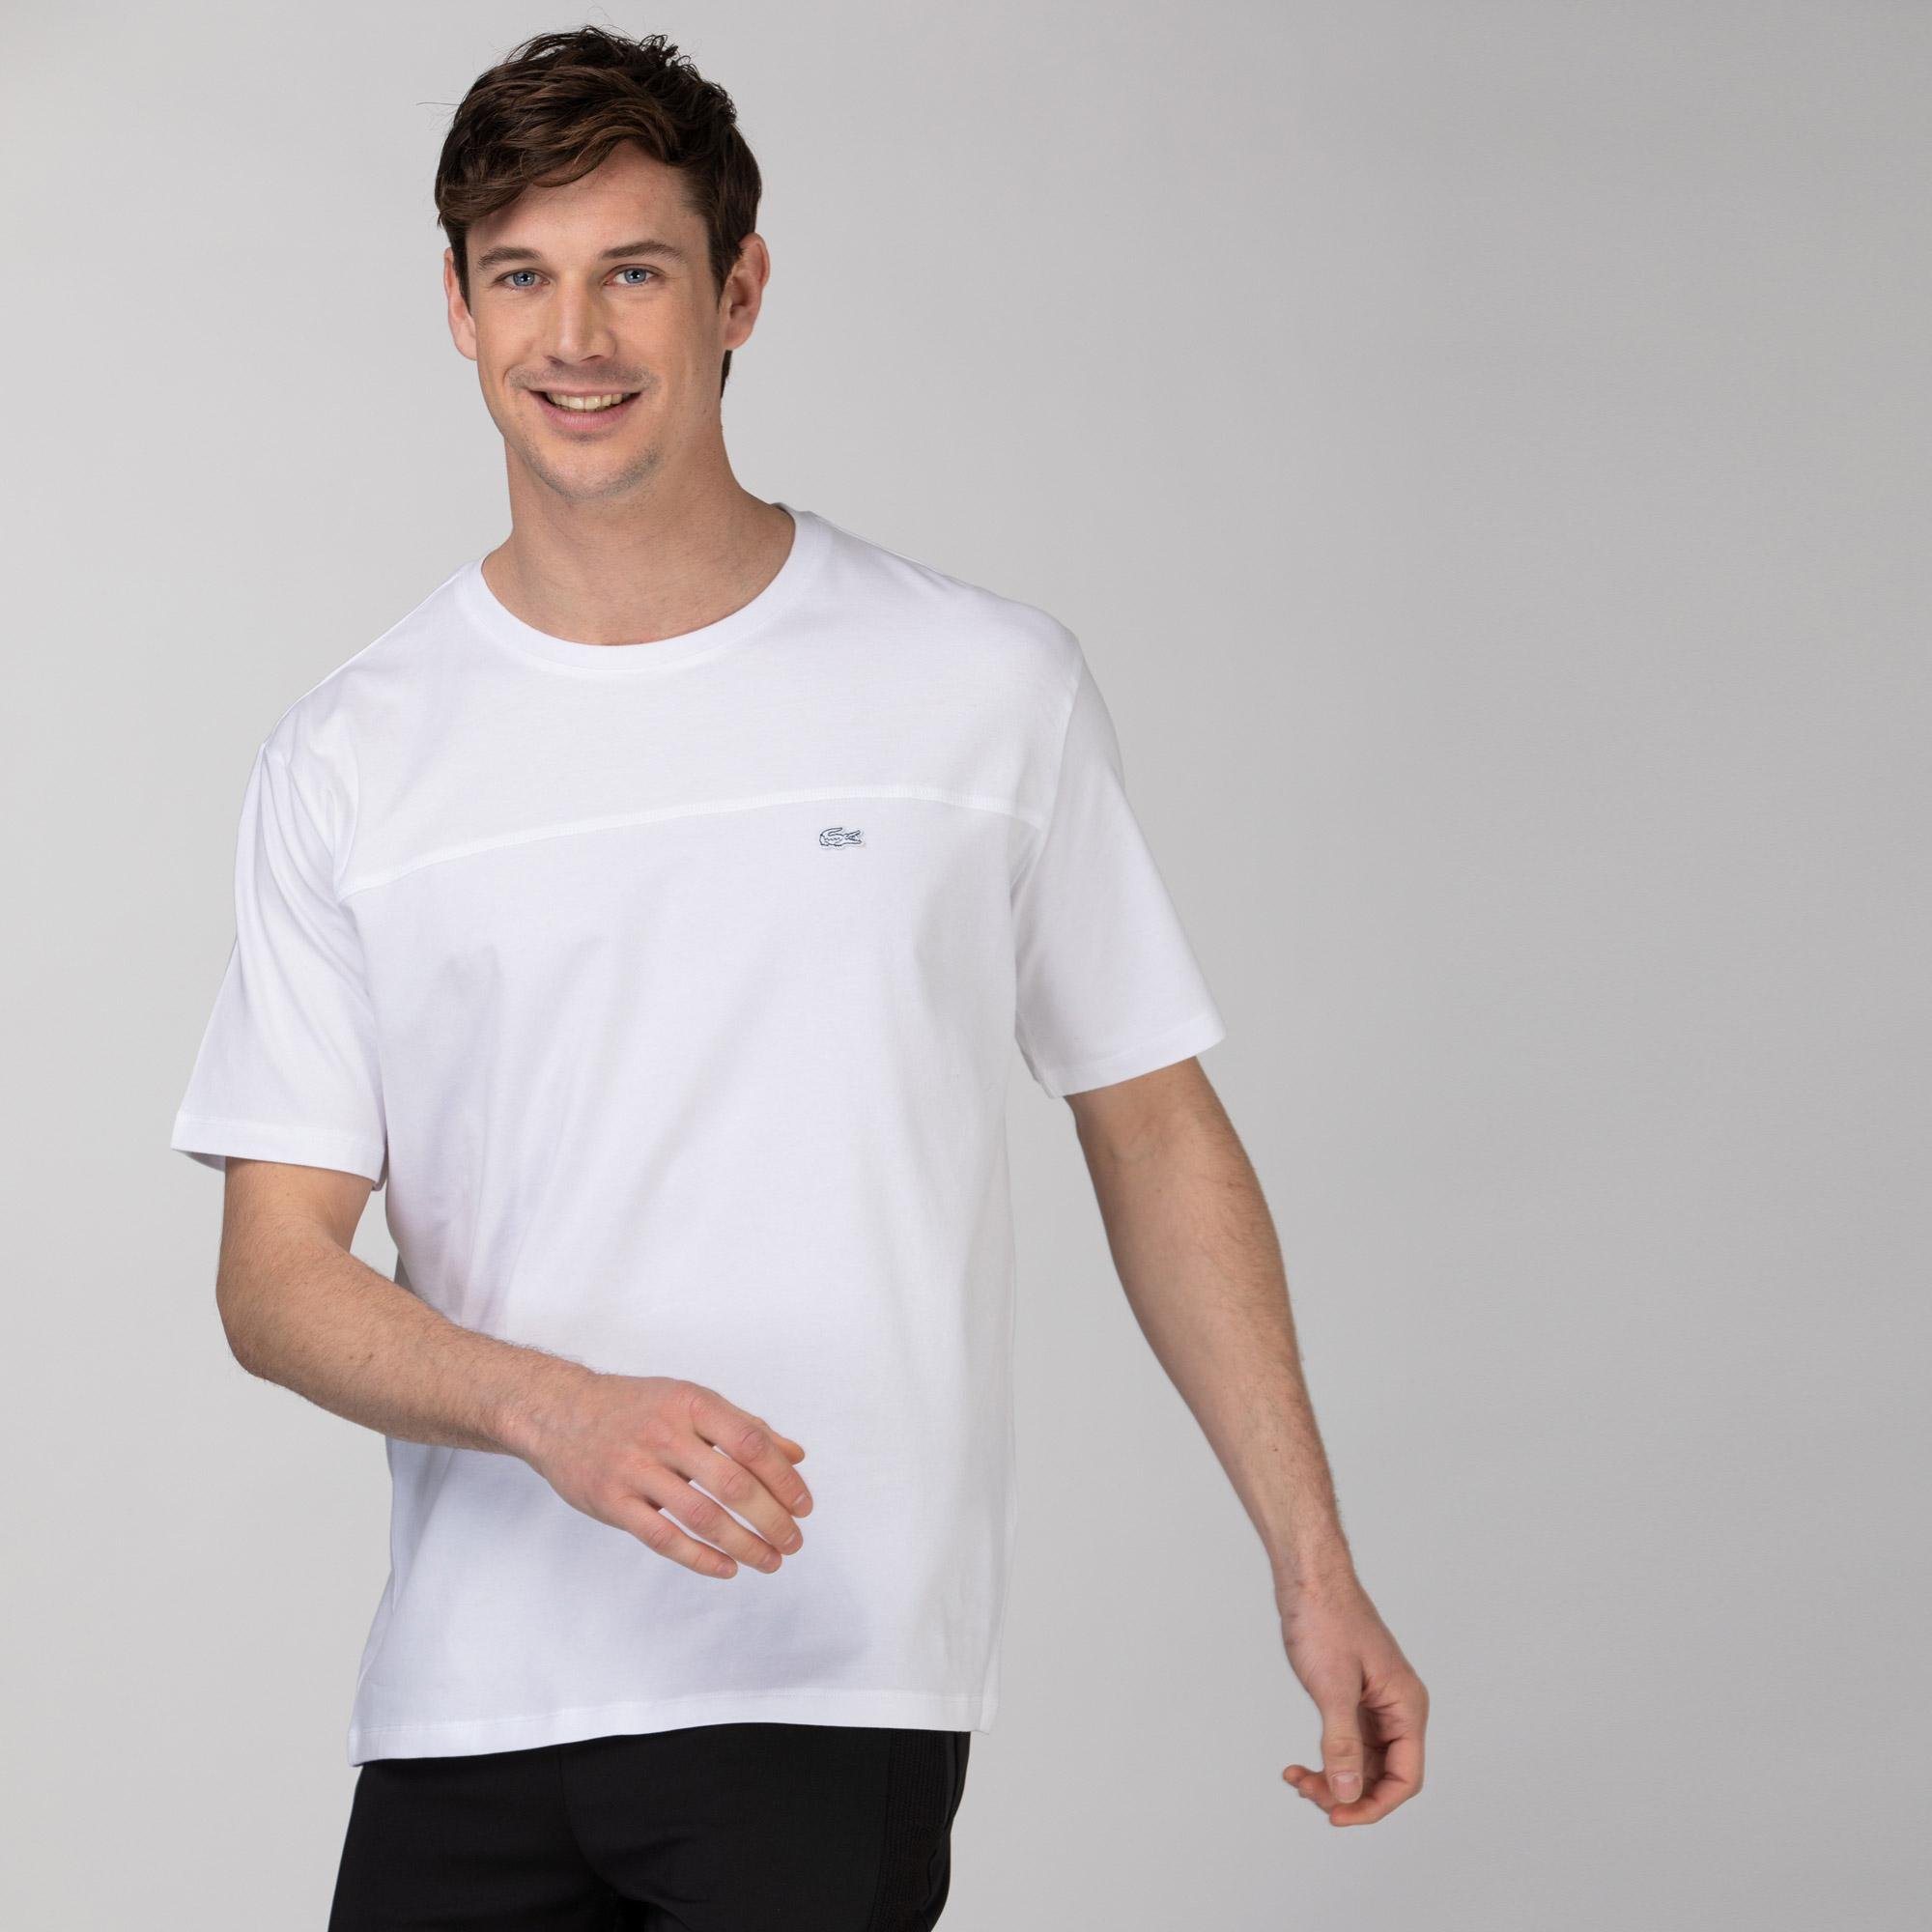 Lacoste Men's Casual Fit Crew Neck Printed T-Shirt